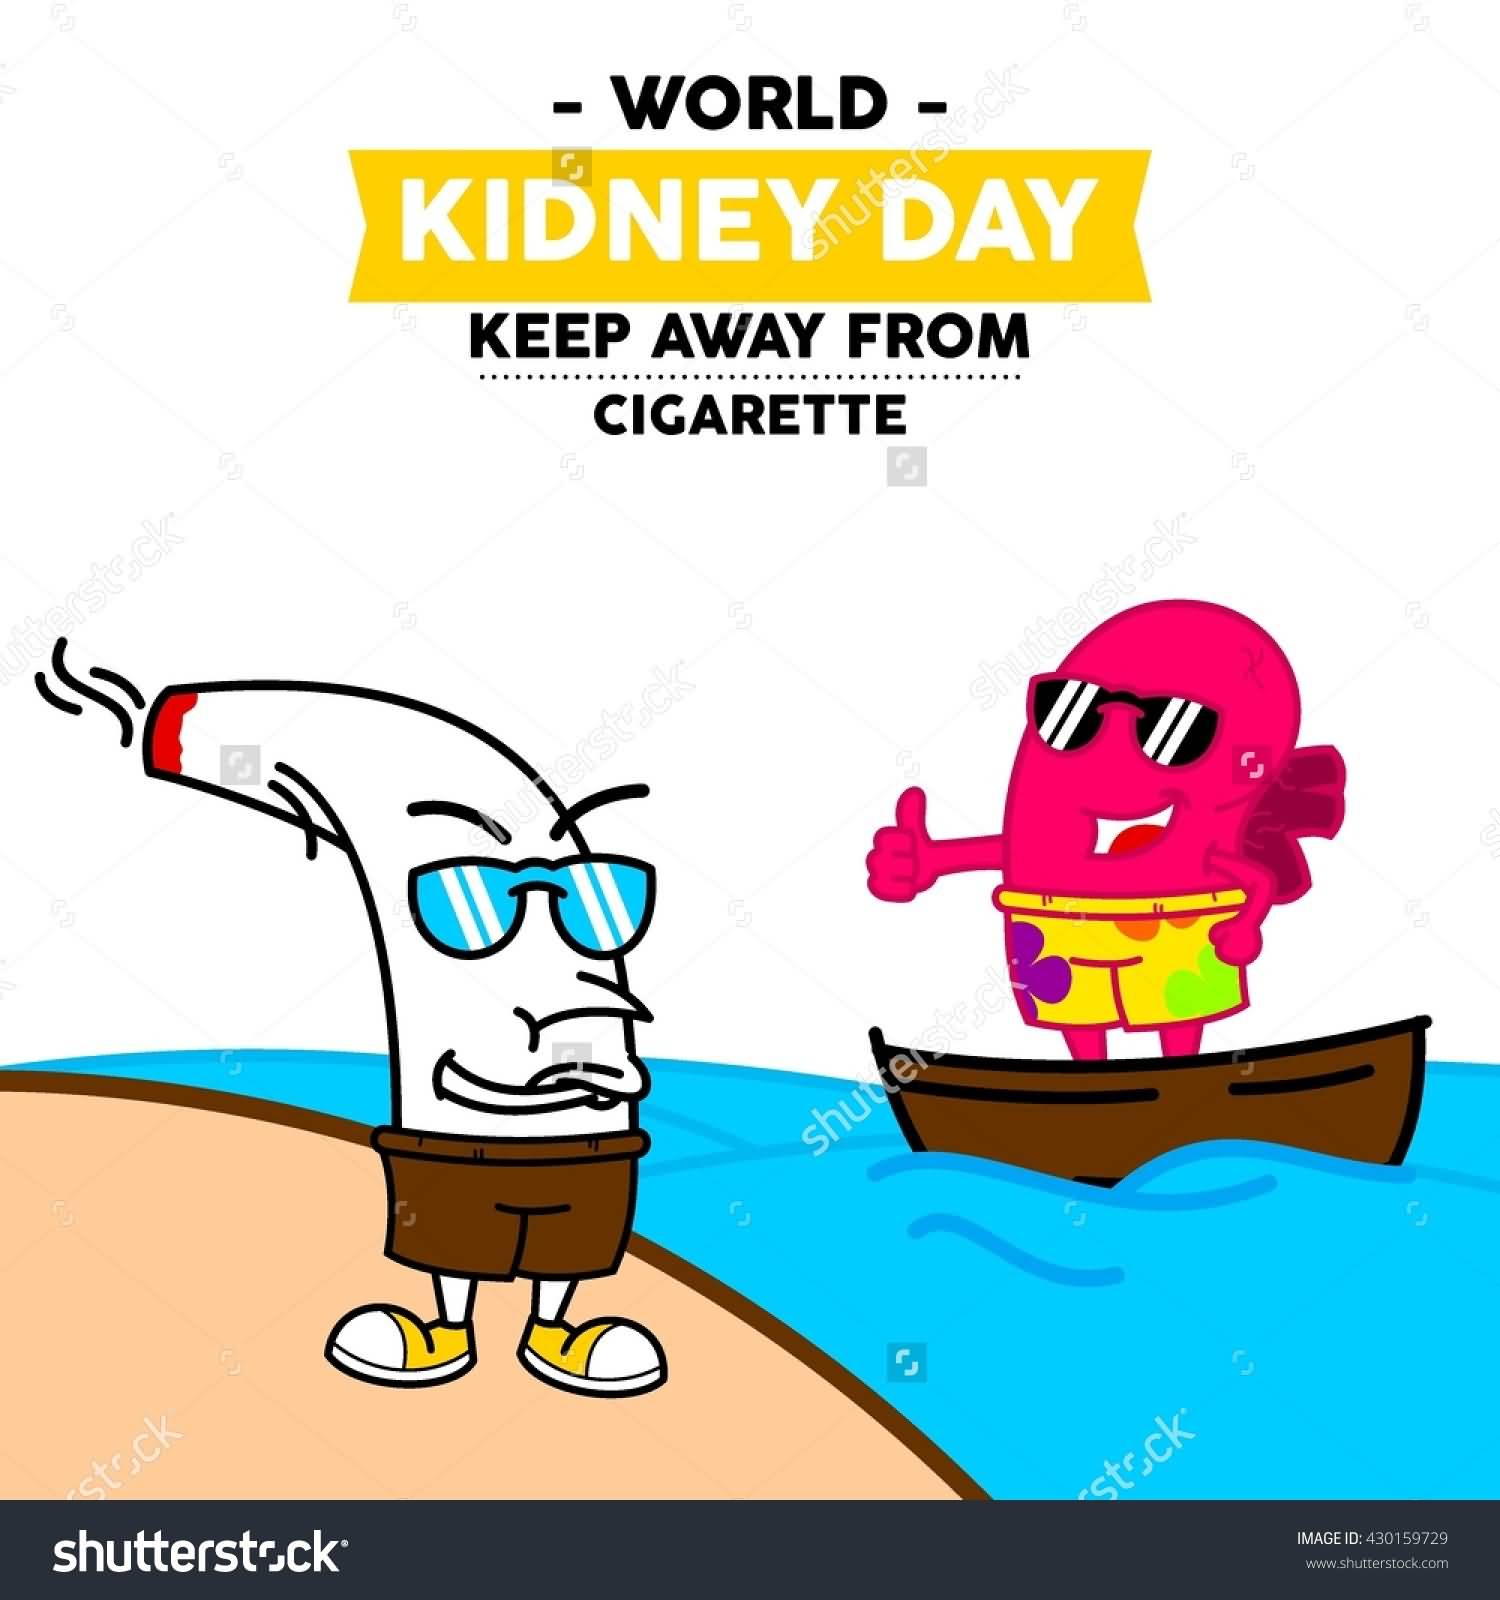 World Kidney Day Keep Away From Cigarette Illustration